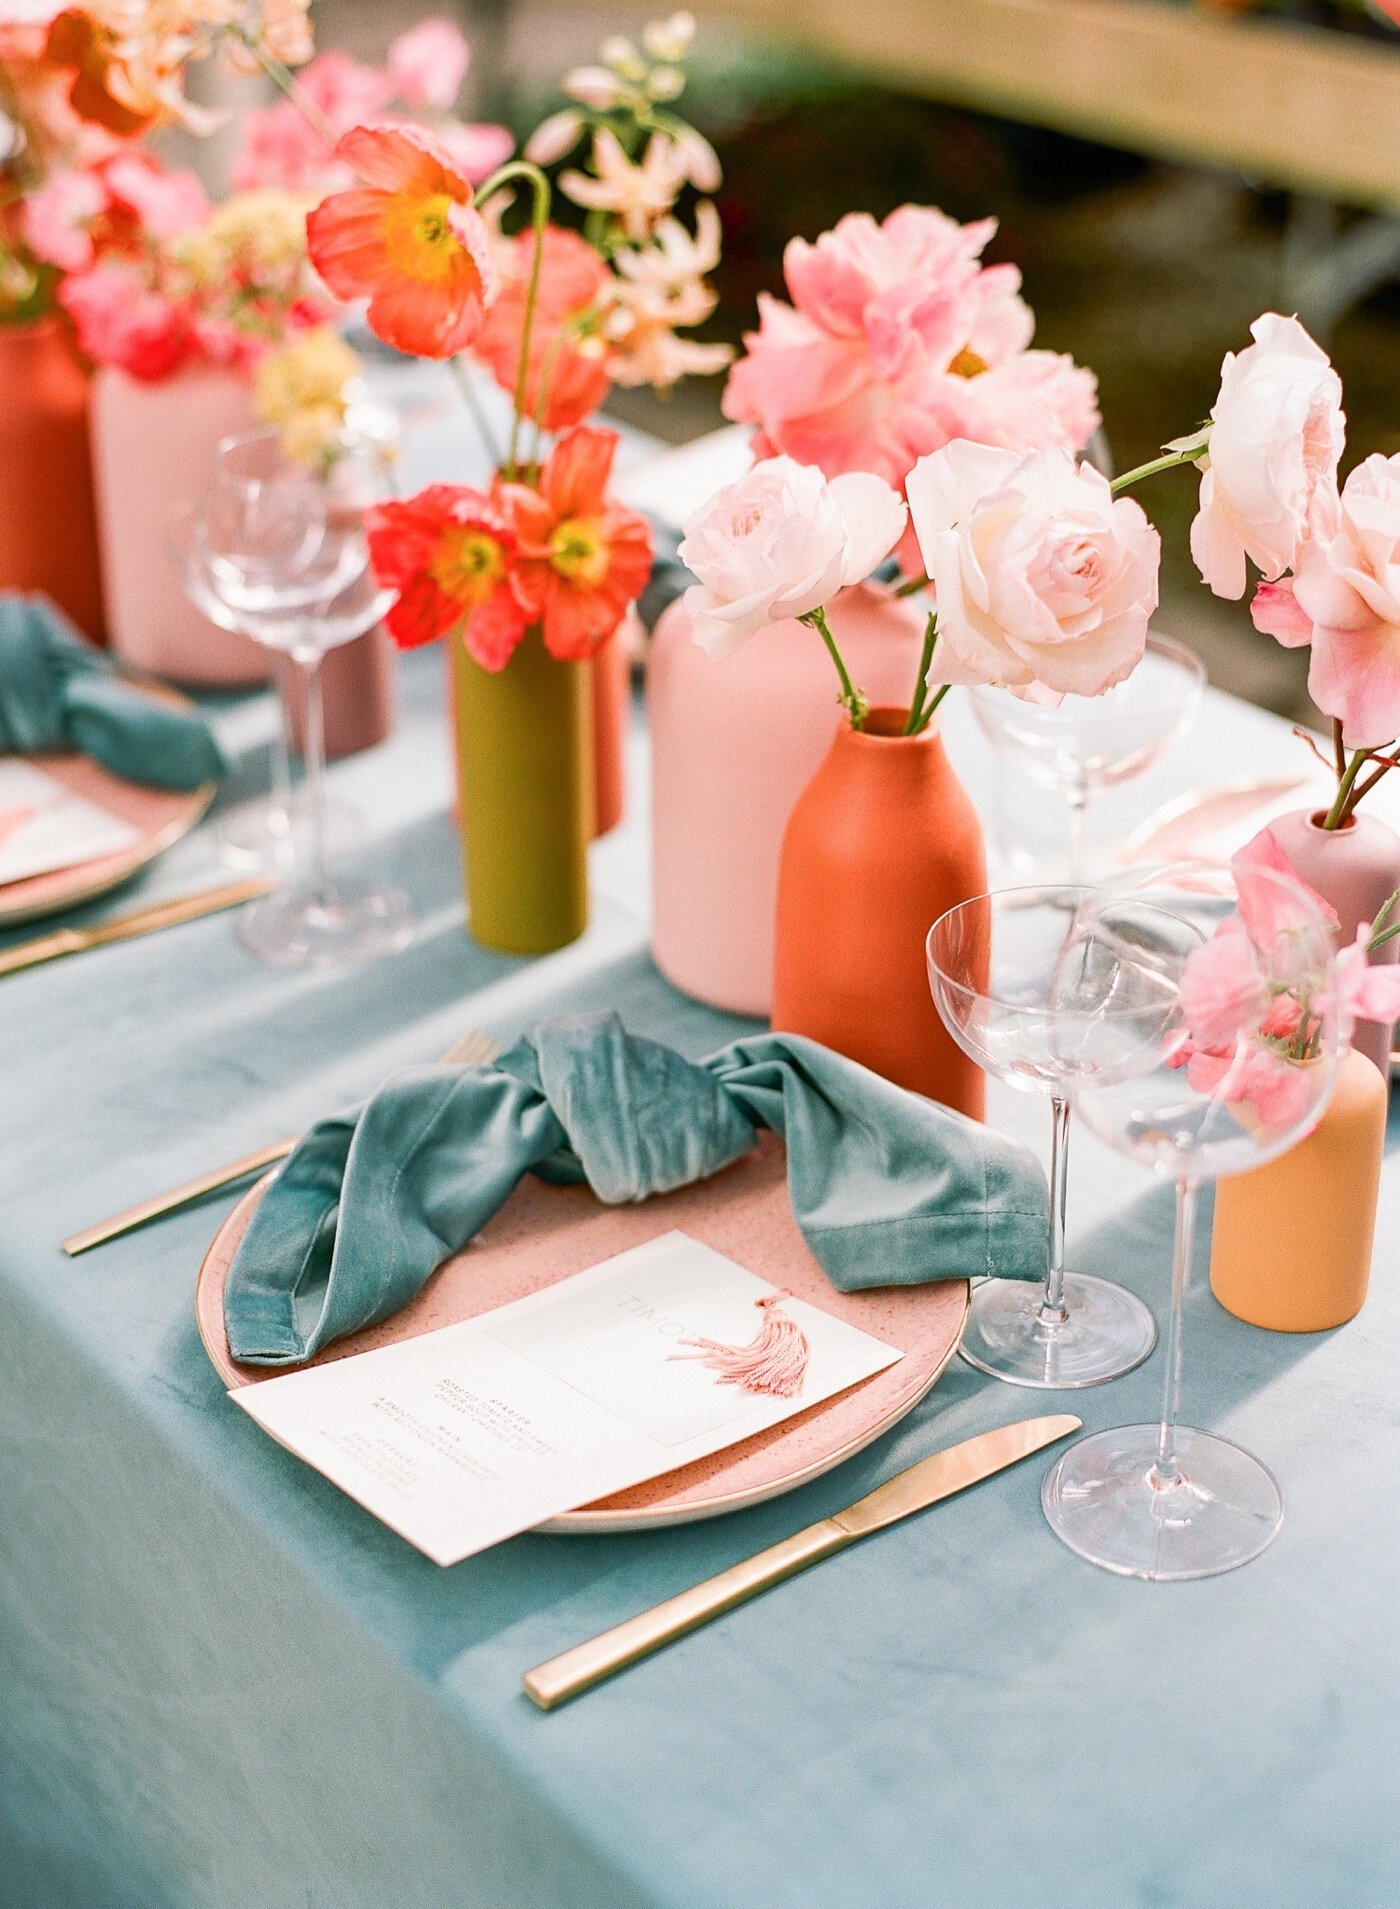 Colorful wedding tablescape at Christianson's Nursery with teal linen